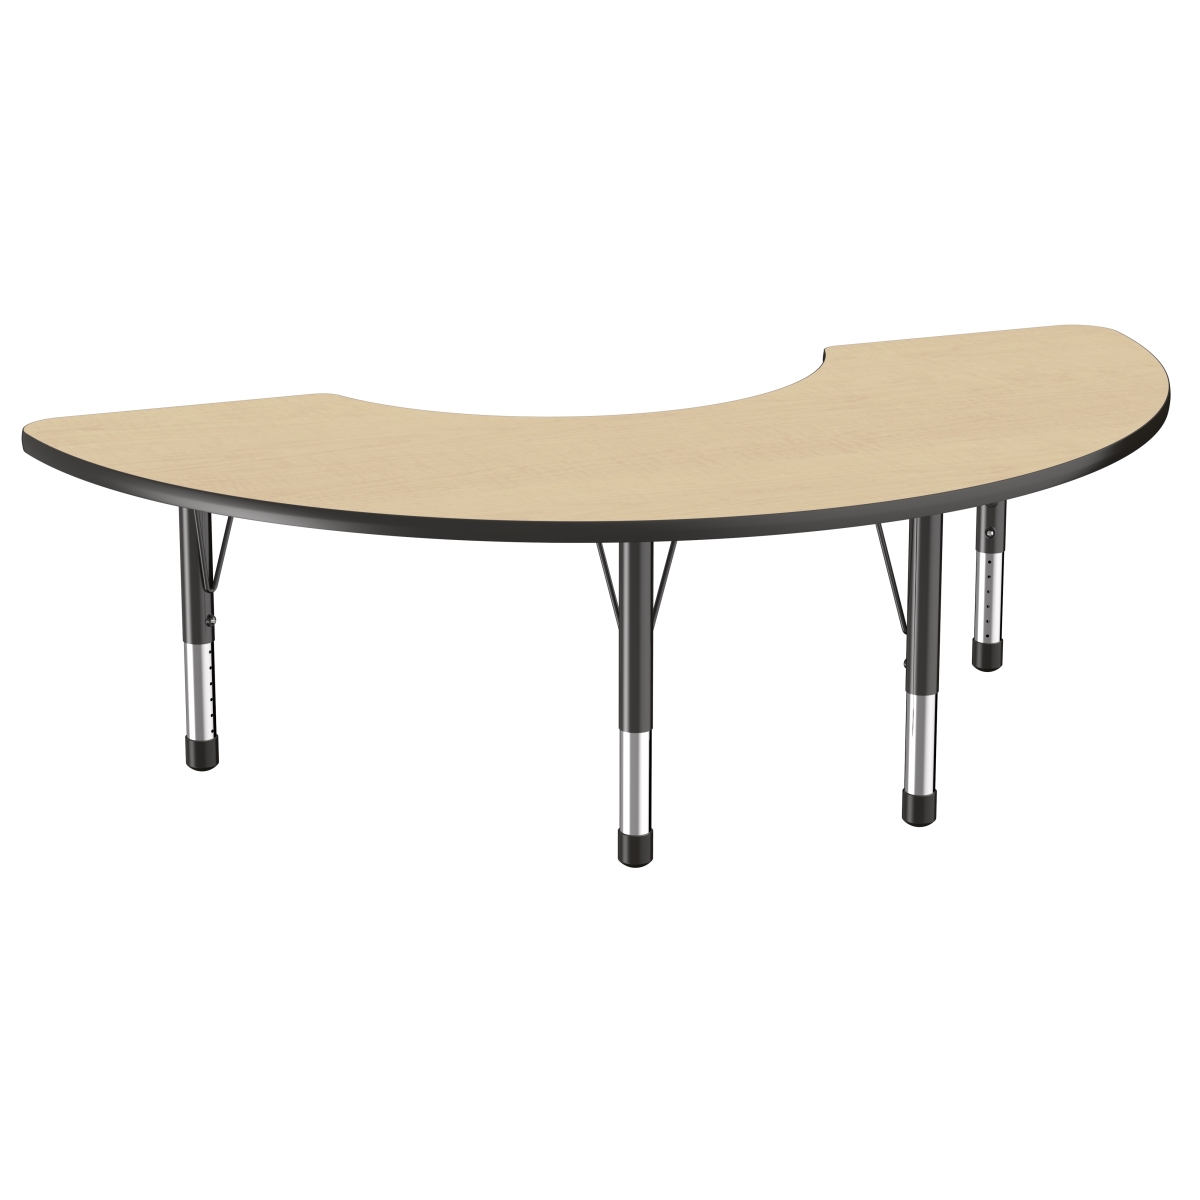 10079-mpbk 36 X 72 In. Half Moon T-mold Adjustable Activity Table With Chunky Leg - Maple & Black